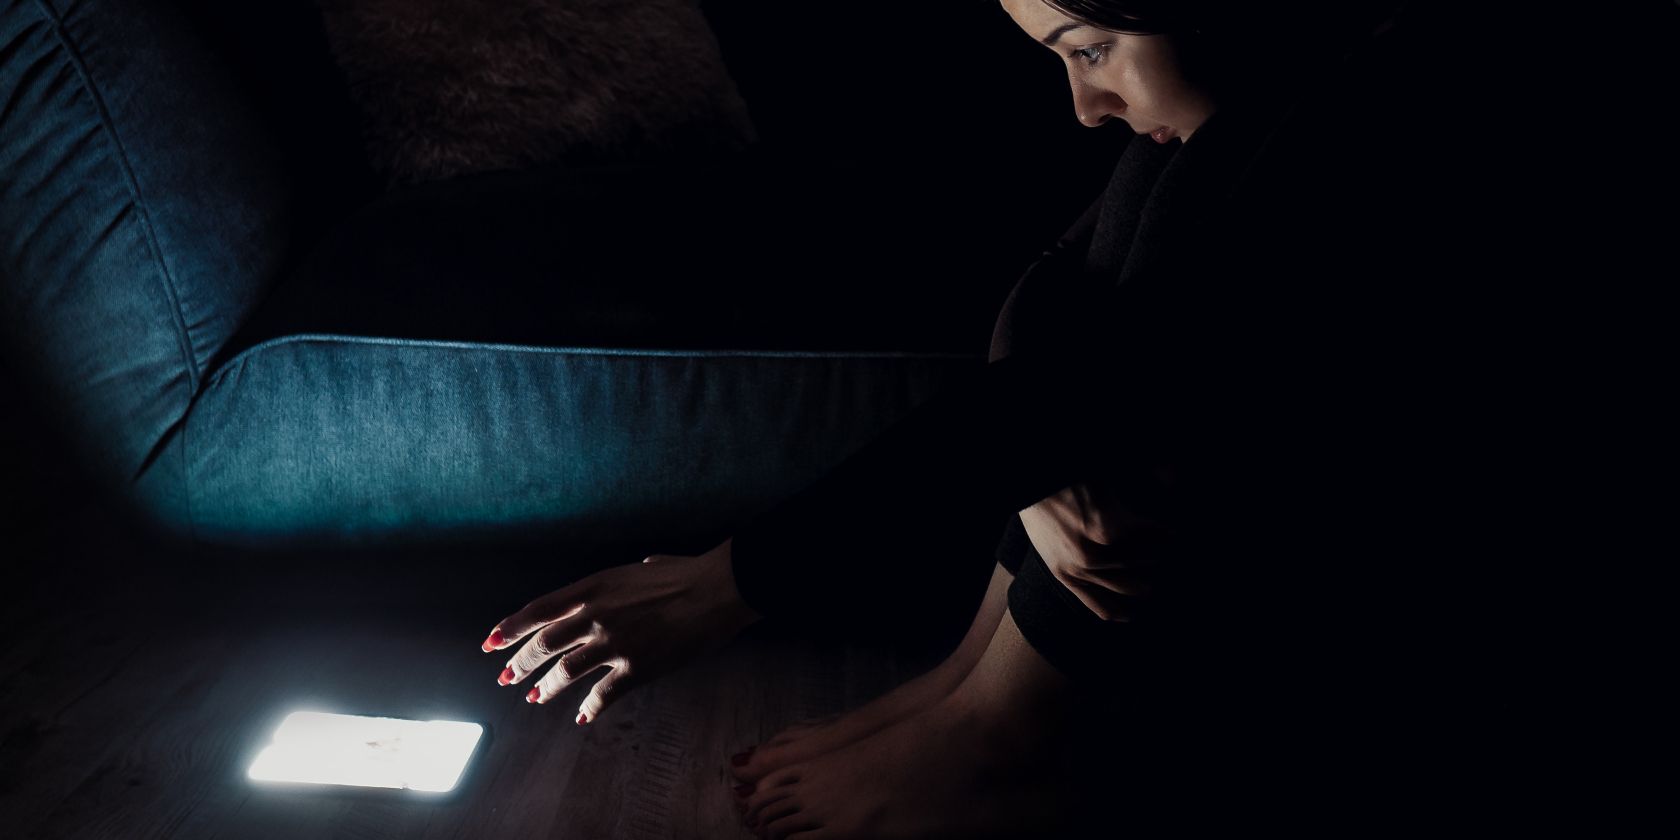 A woman reaching out to her phone while in a dark room